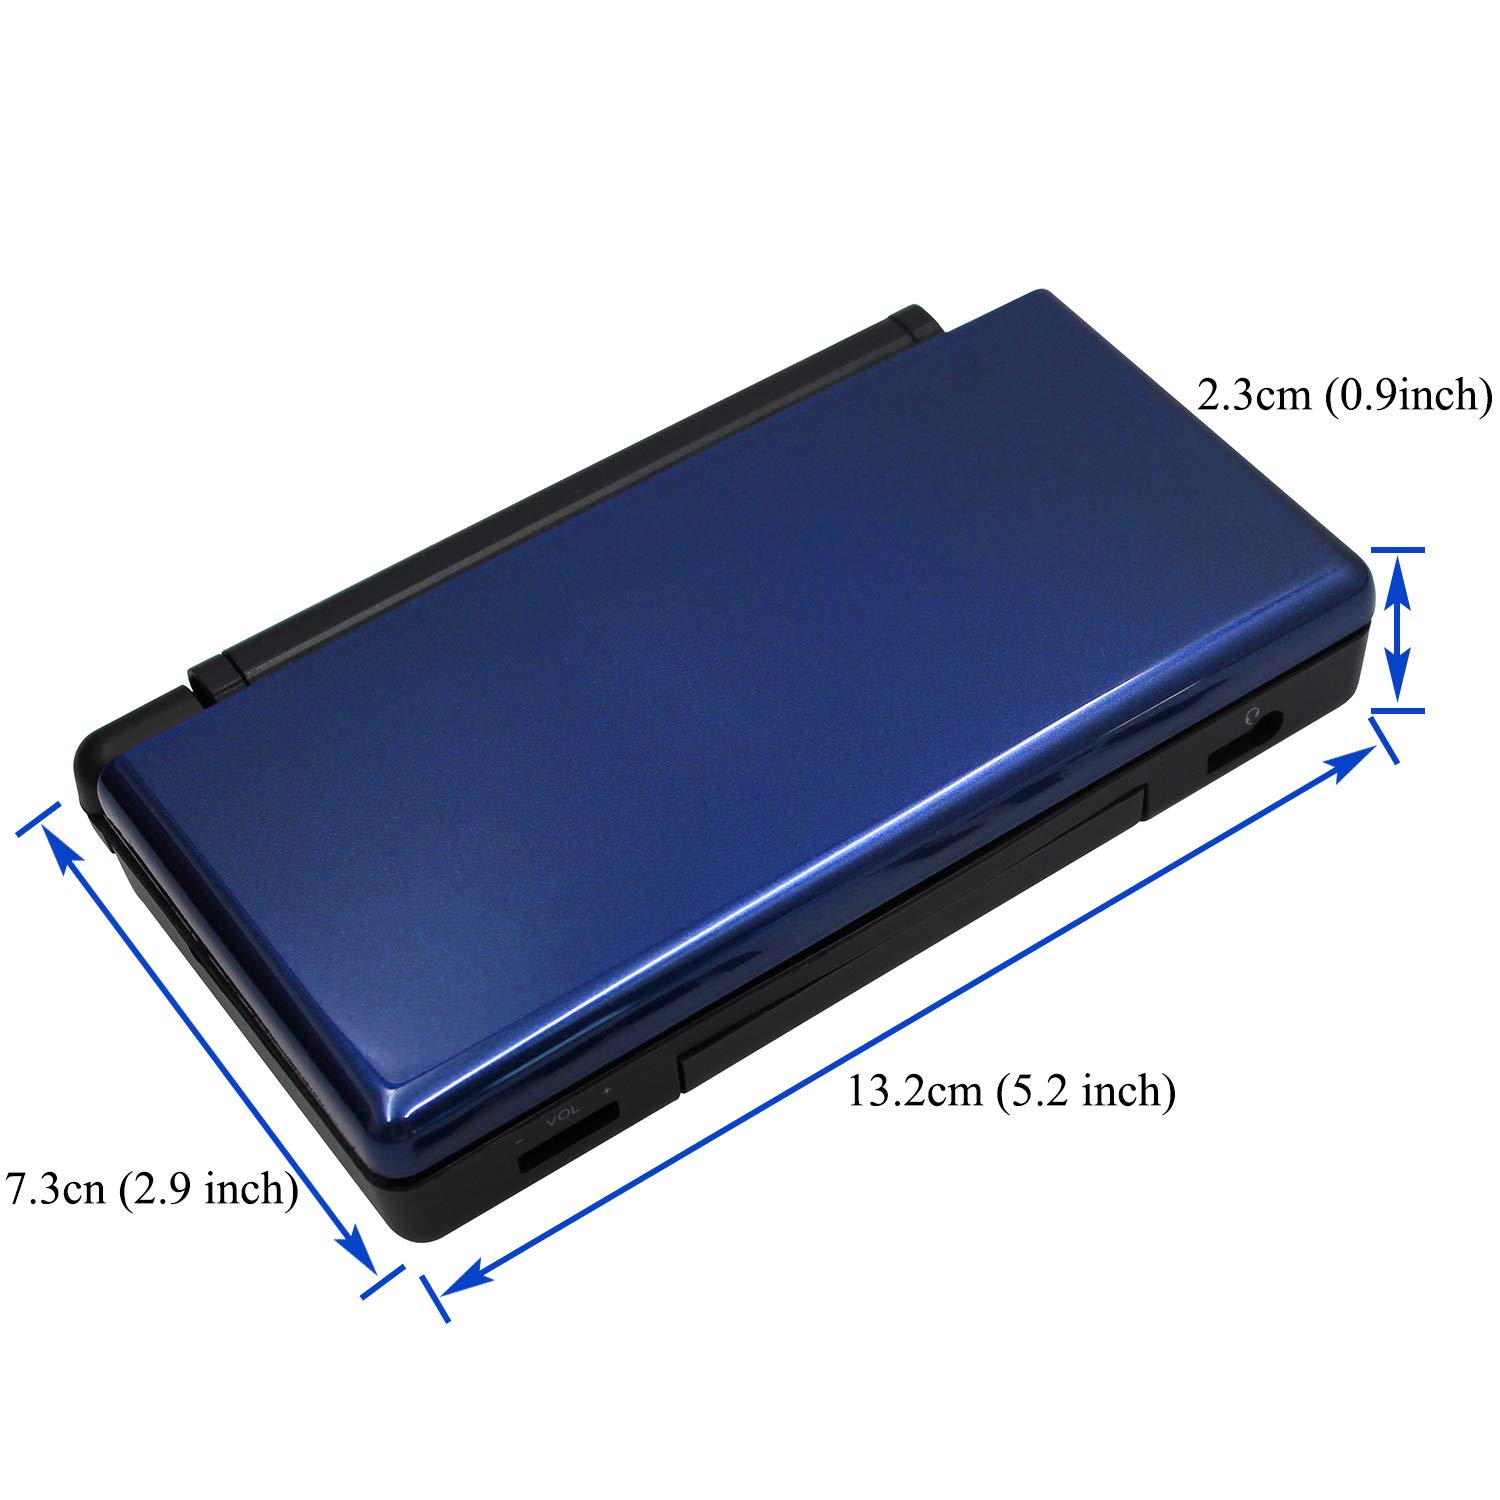 OSTENT Full Repair Parts Replacement Housing Shell Case Kit for Nintendo DS Lite NDSL Color Blue and Black